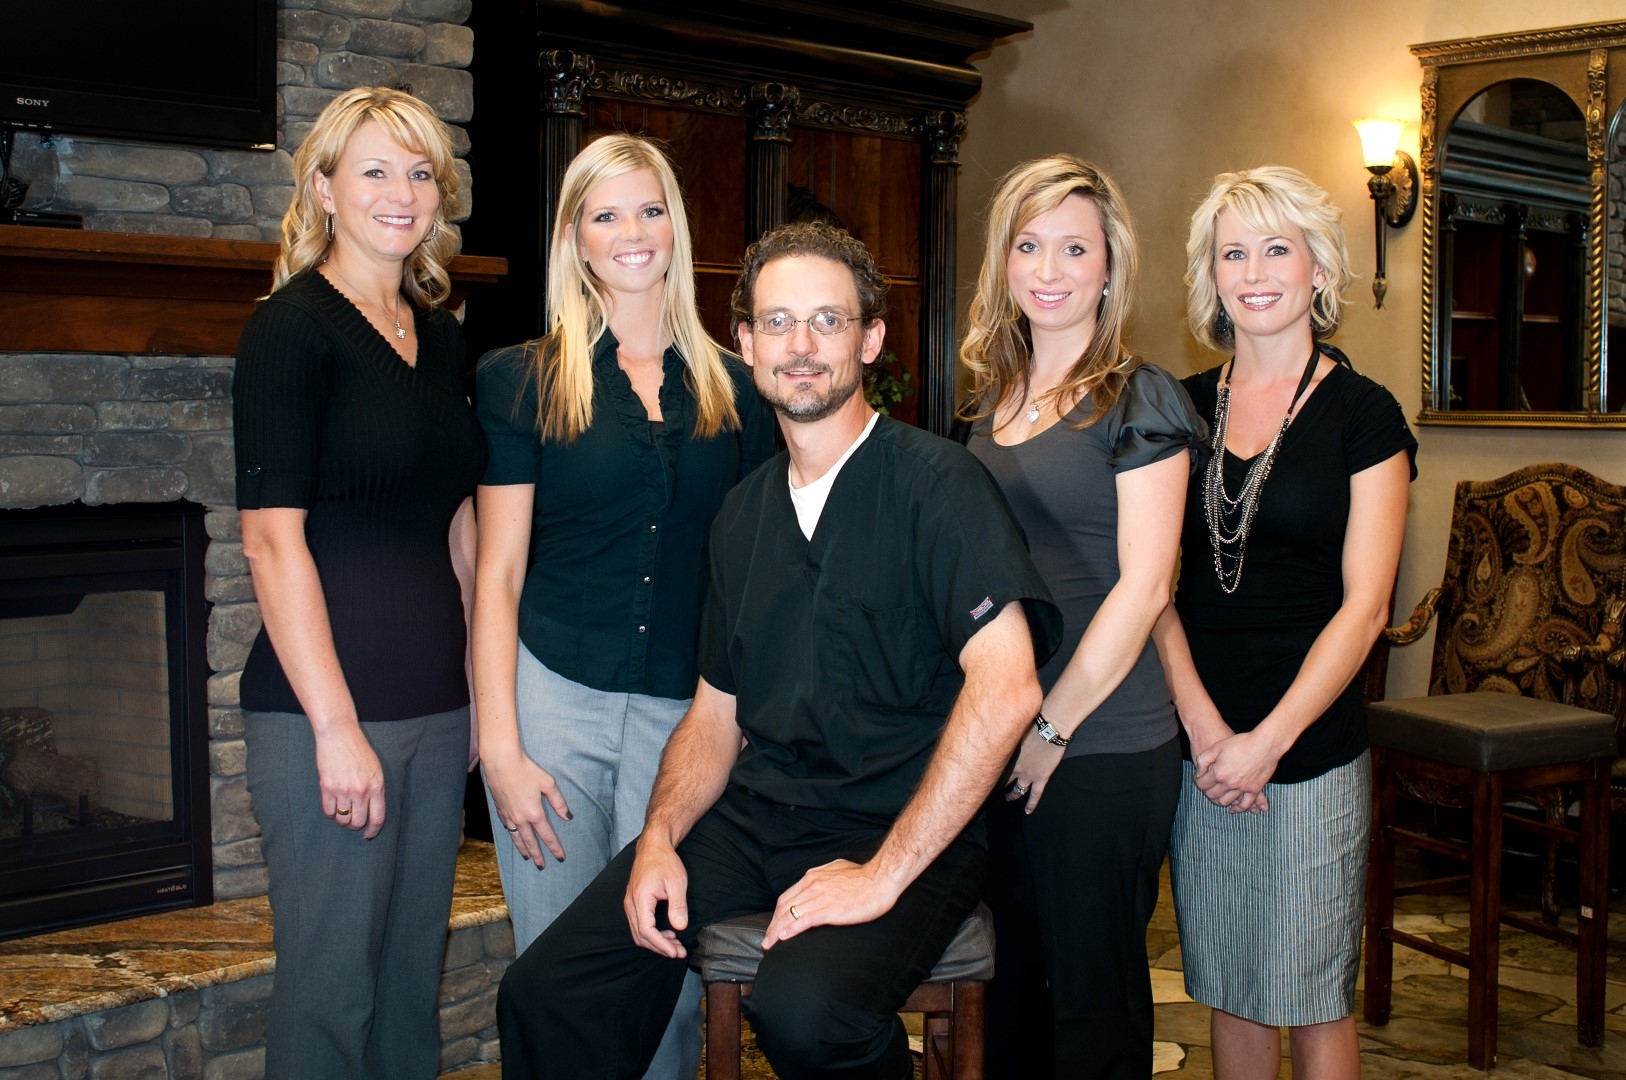 Team of Salt Lake City Utah Cosmetic Surgery Dr. Richard Fryer who has the highest Google and other reviews and specializes in breast augmentation, breast implants, breast reduction, and cosmetic surgery.